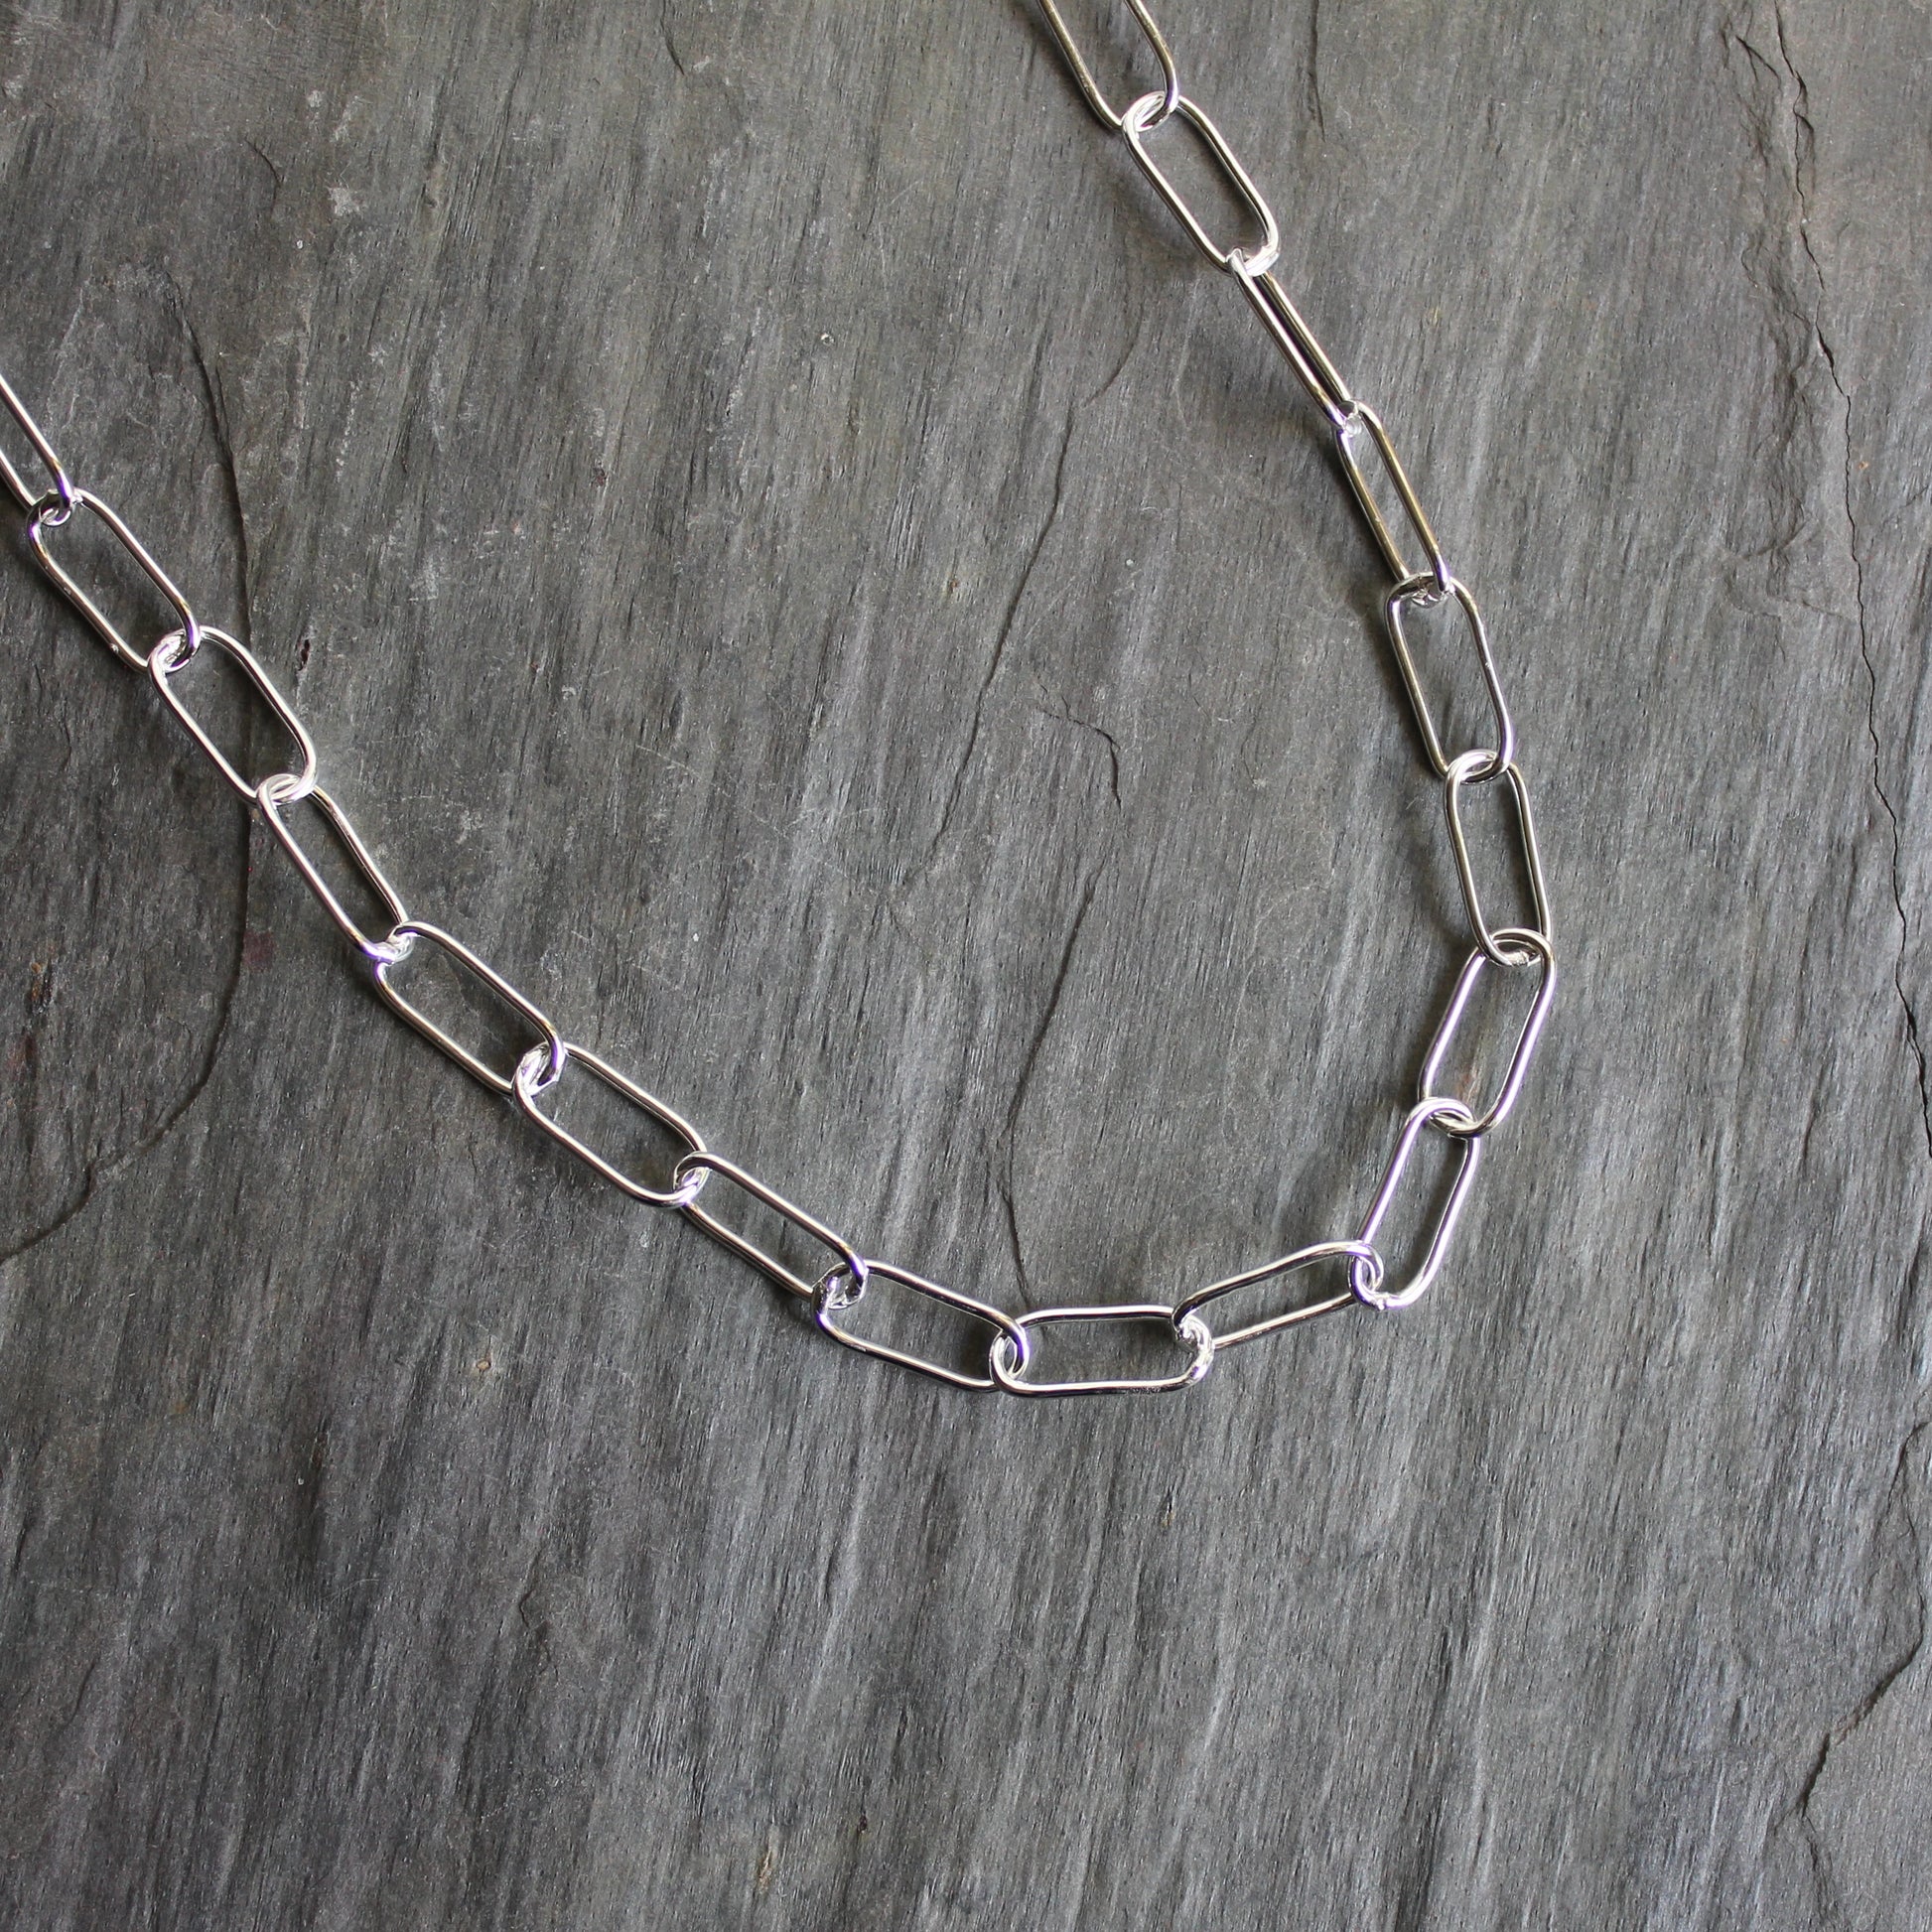 handmade sterling silver oval link chain necklace crafted with sterling silver wire and a lobster clasp